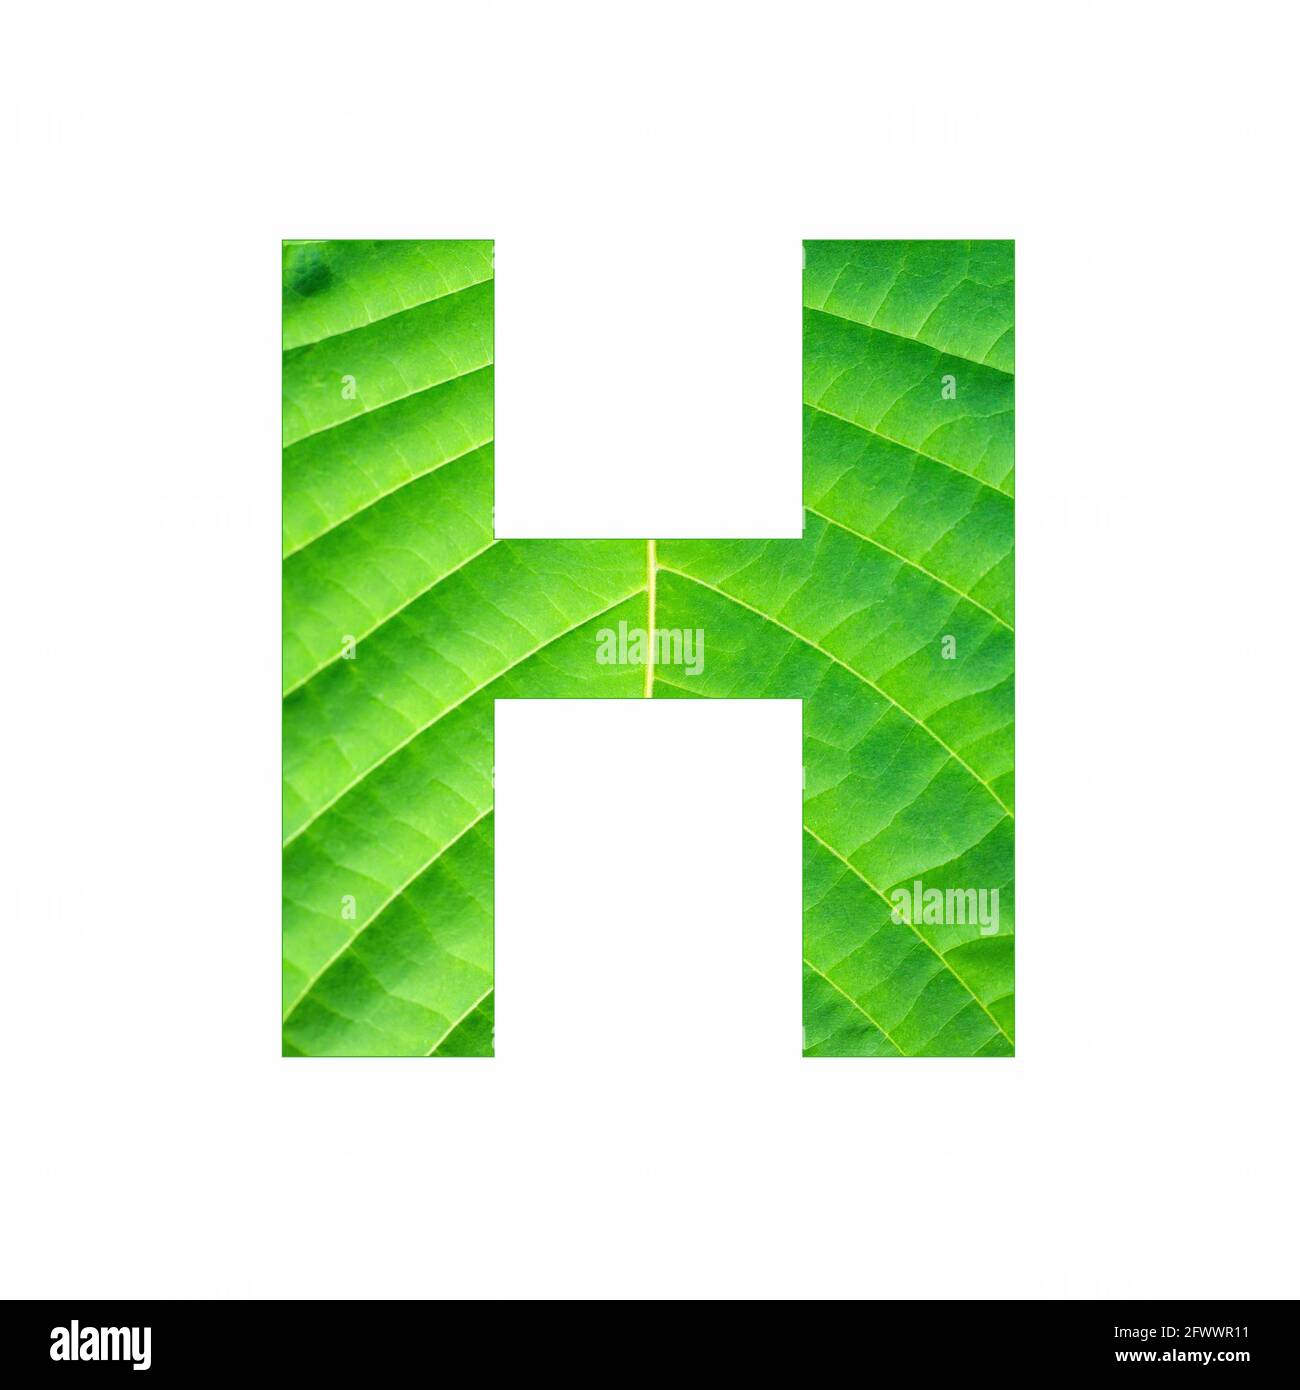 Uppercase Alphabet Letter H - Tropical green leaf texture Stock Photo